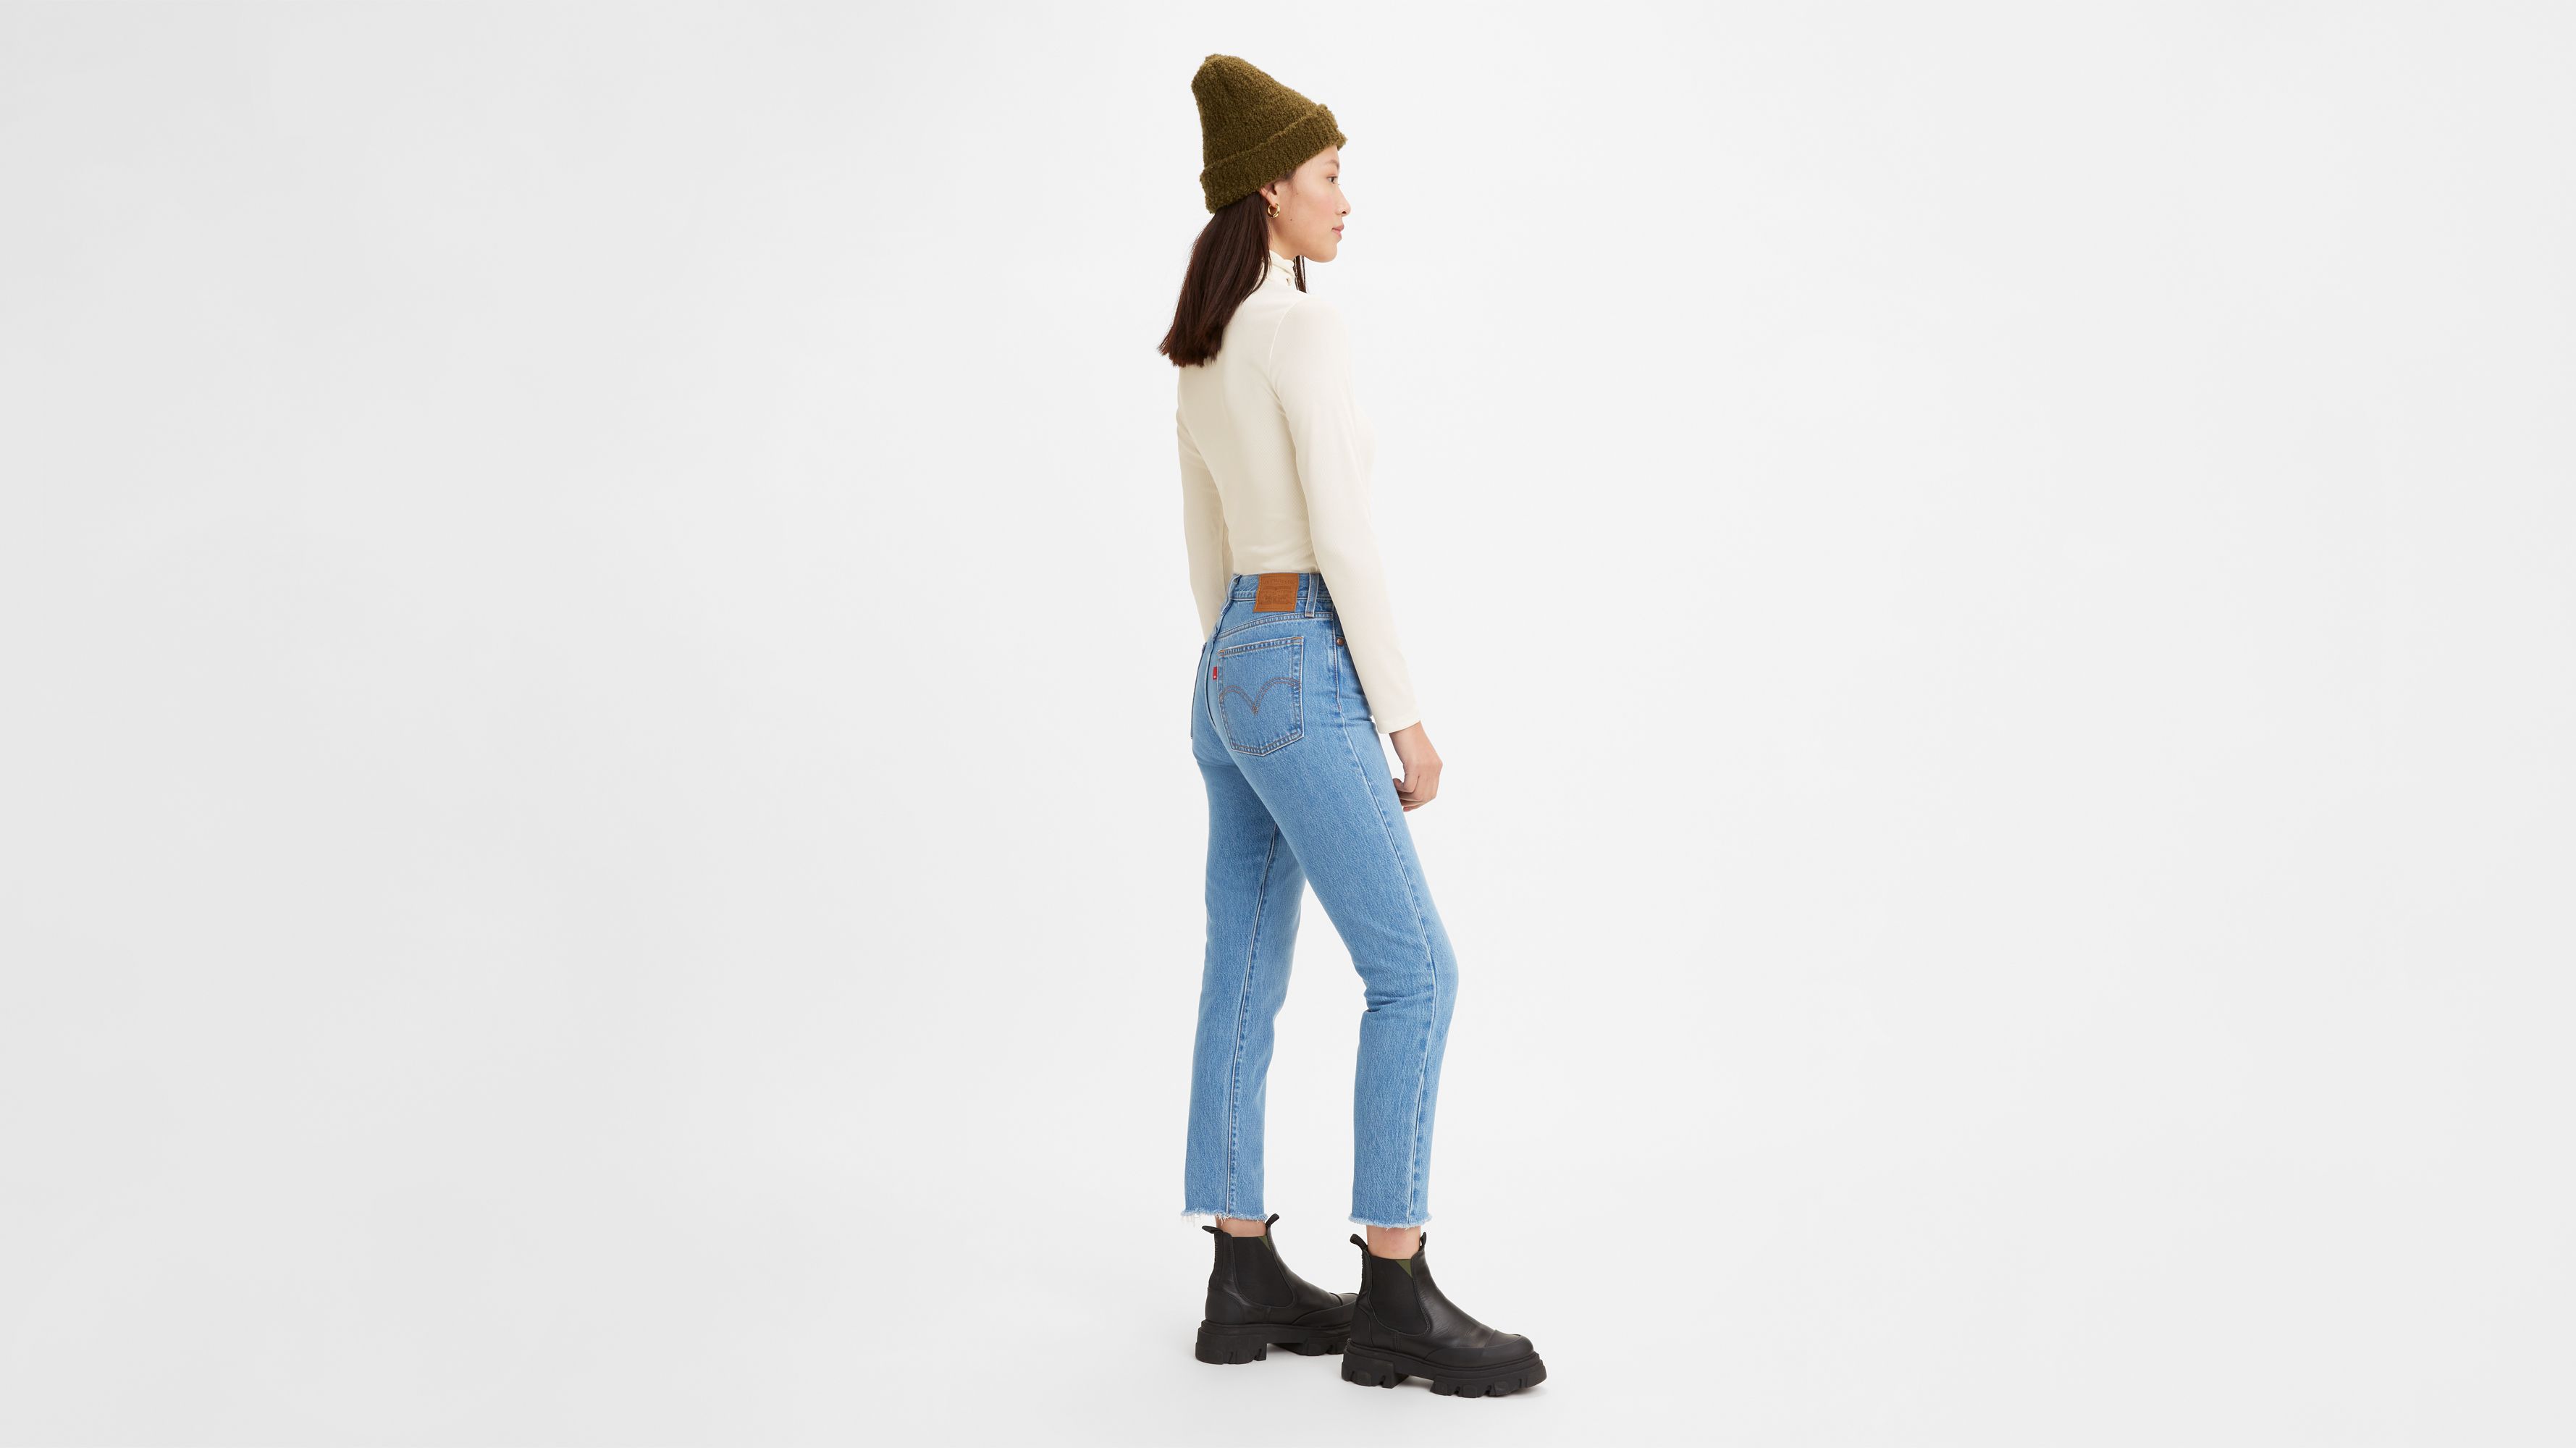 Wedgie Icon Fit Ankle Women's Jeans - Medium Wash | Levi's® US